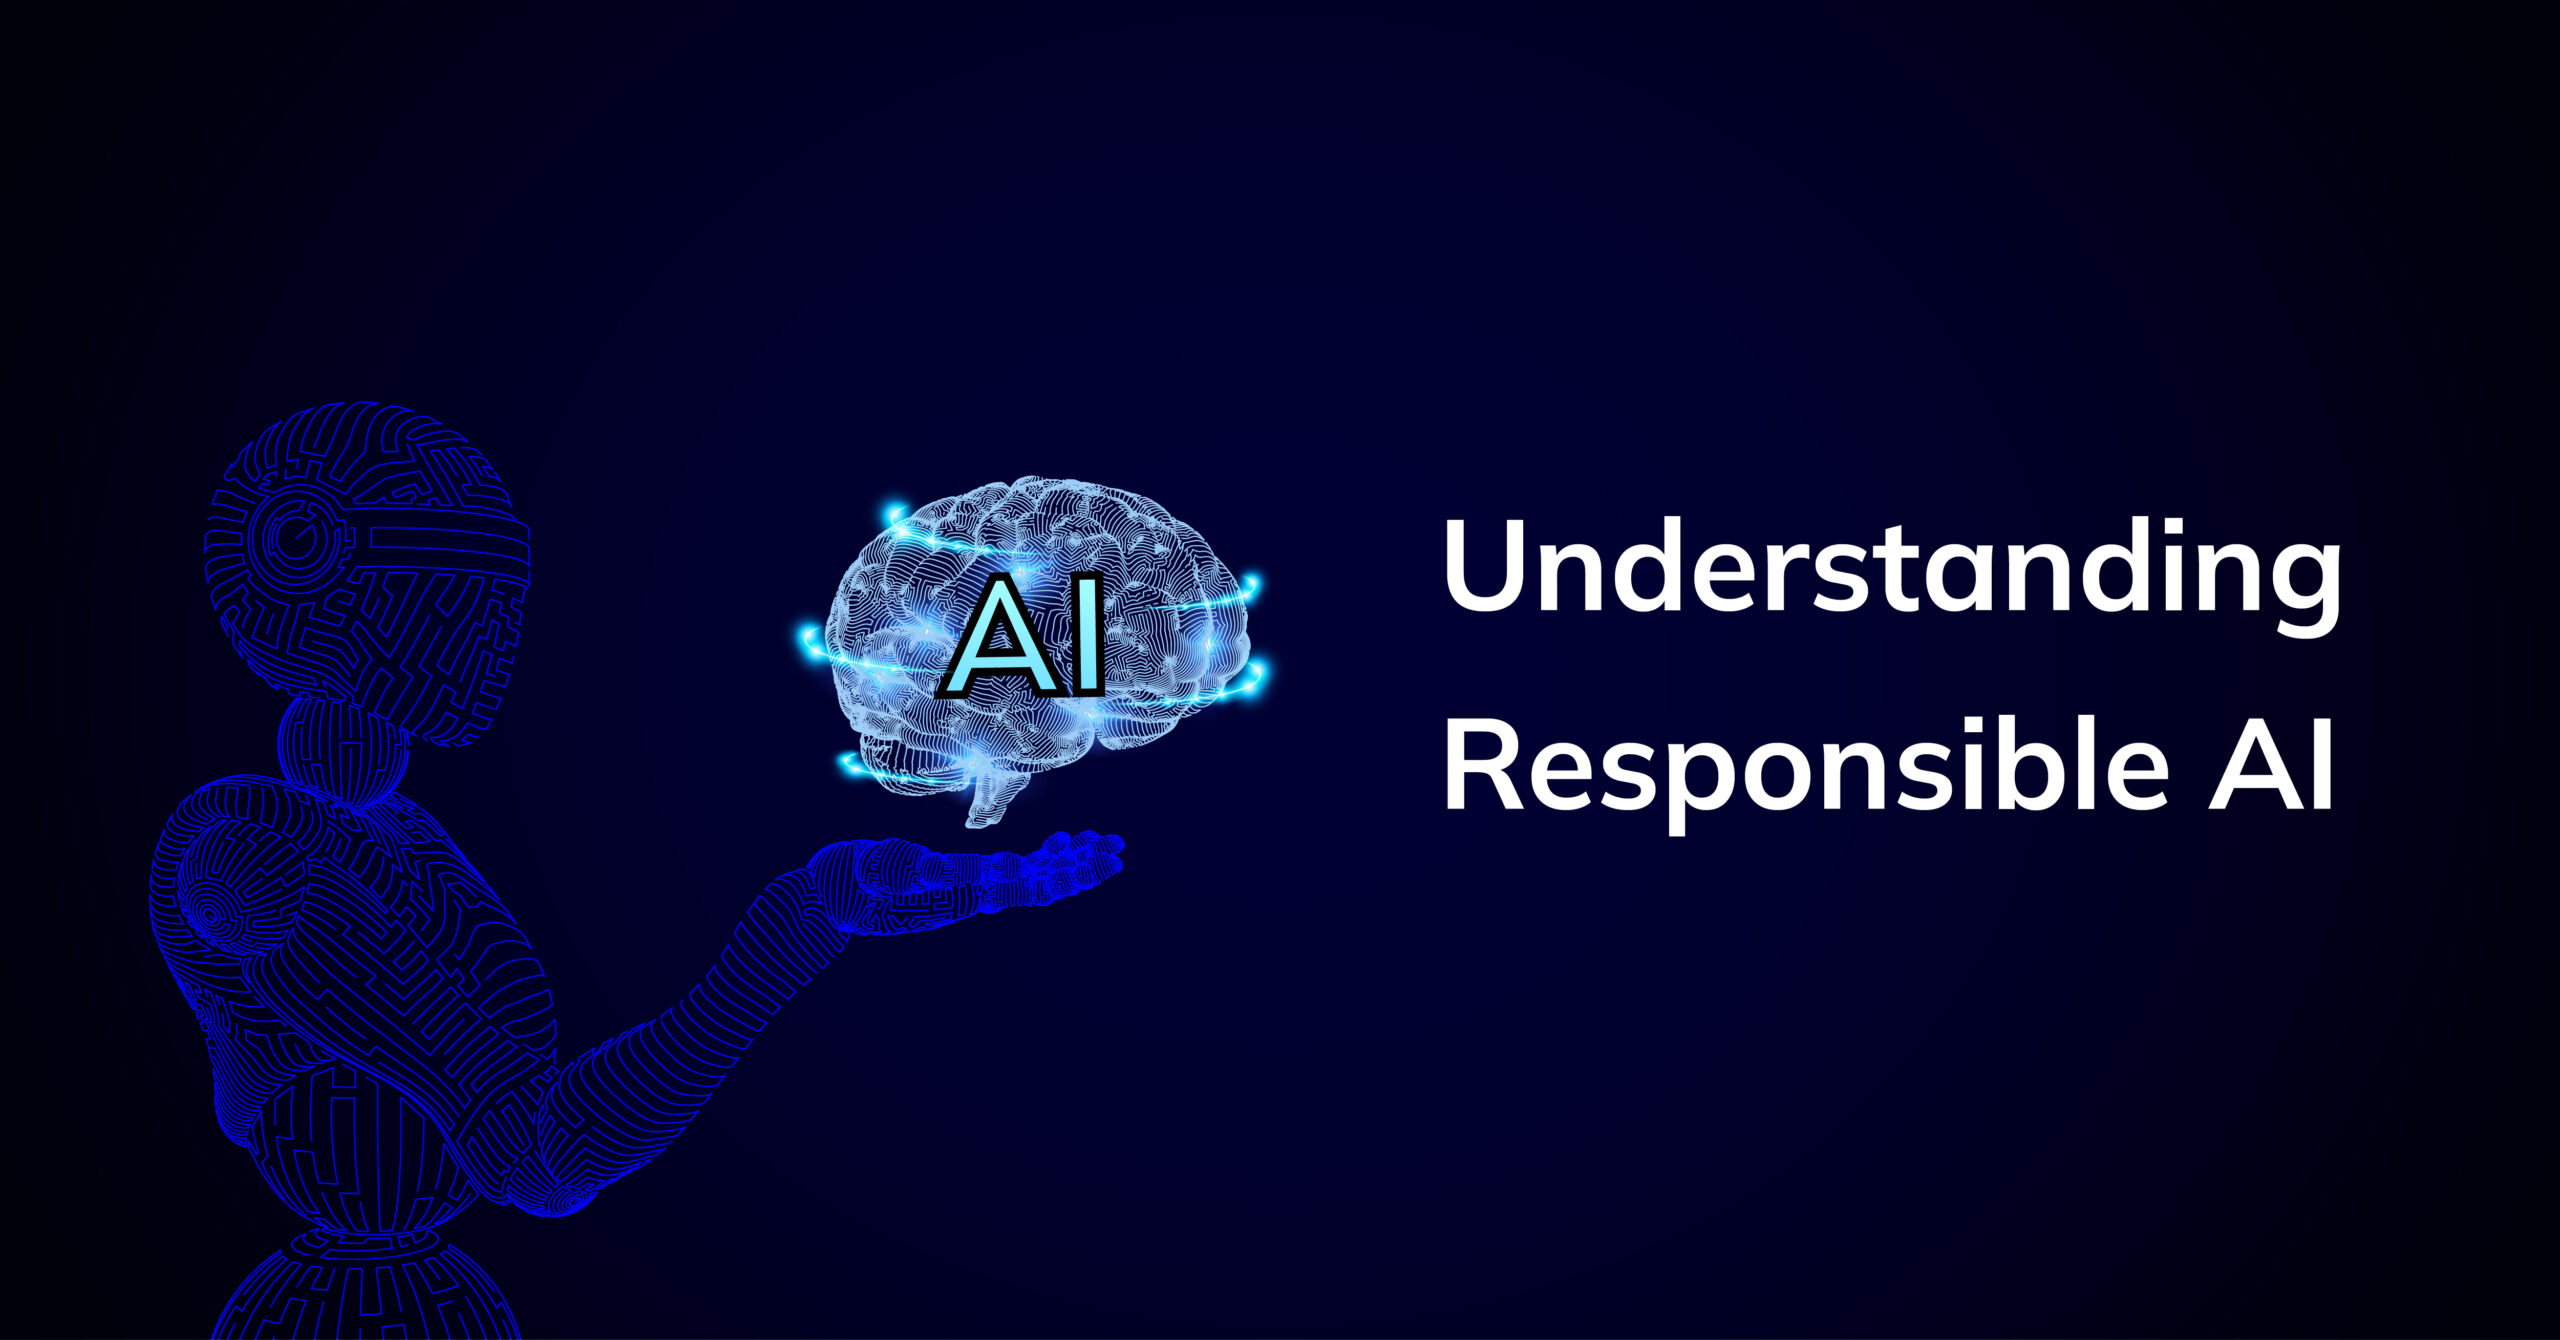 What is Responsible AI? Building & Deploying Trustworthy Artificial Intelligence